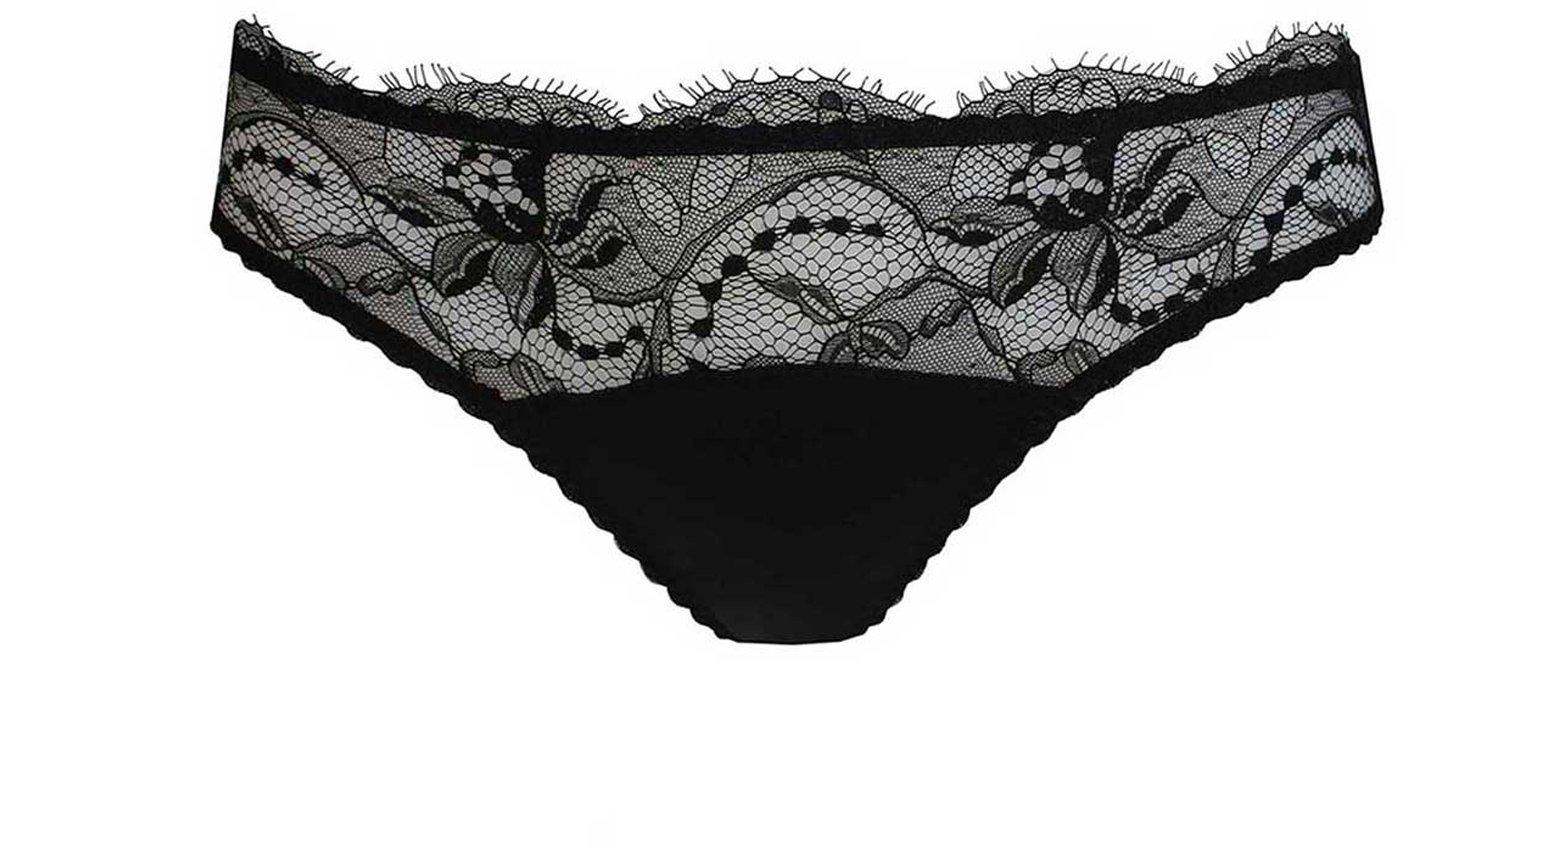 Fleur of England Signature Black Thong XS at FORZIERI